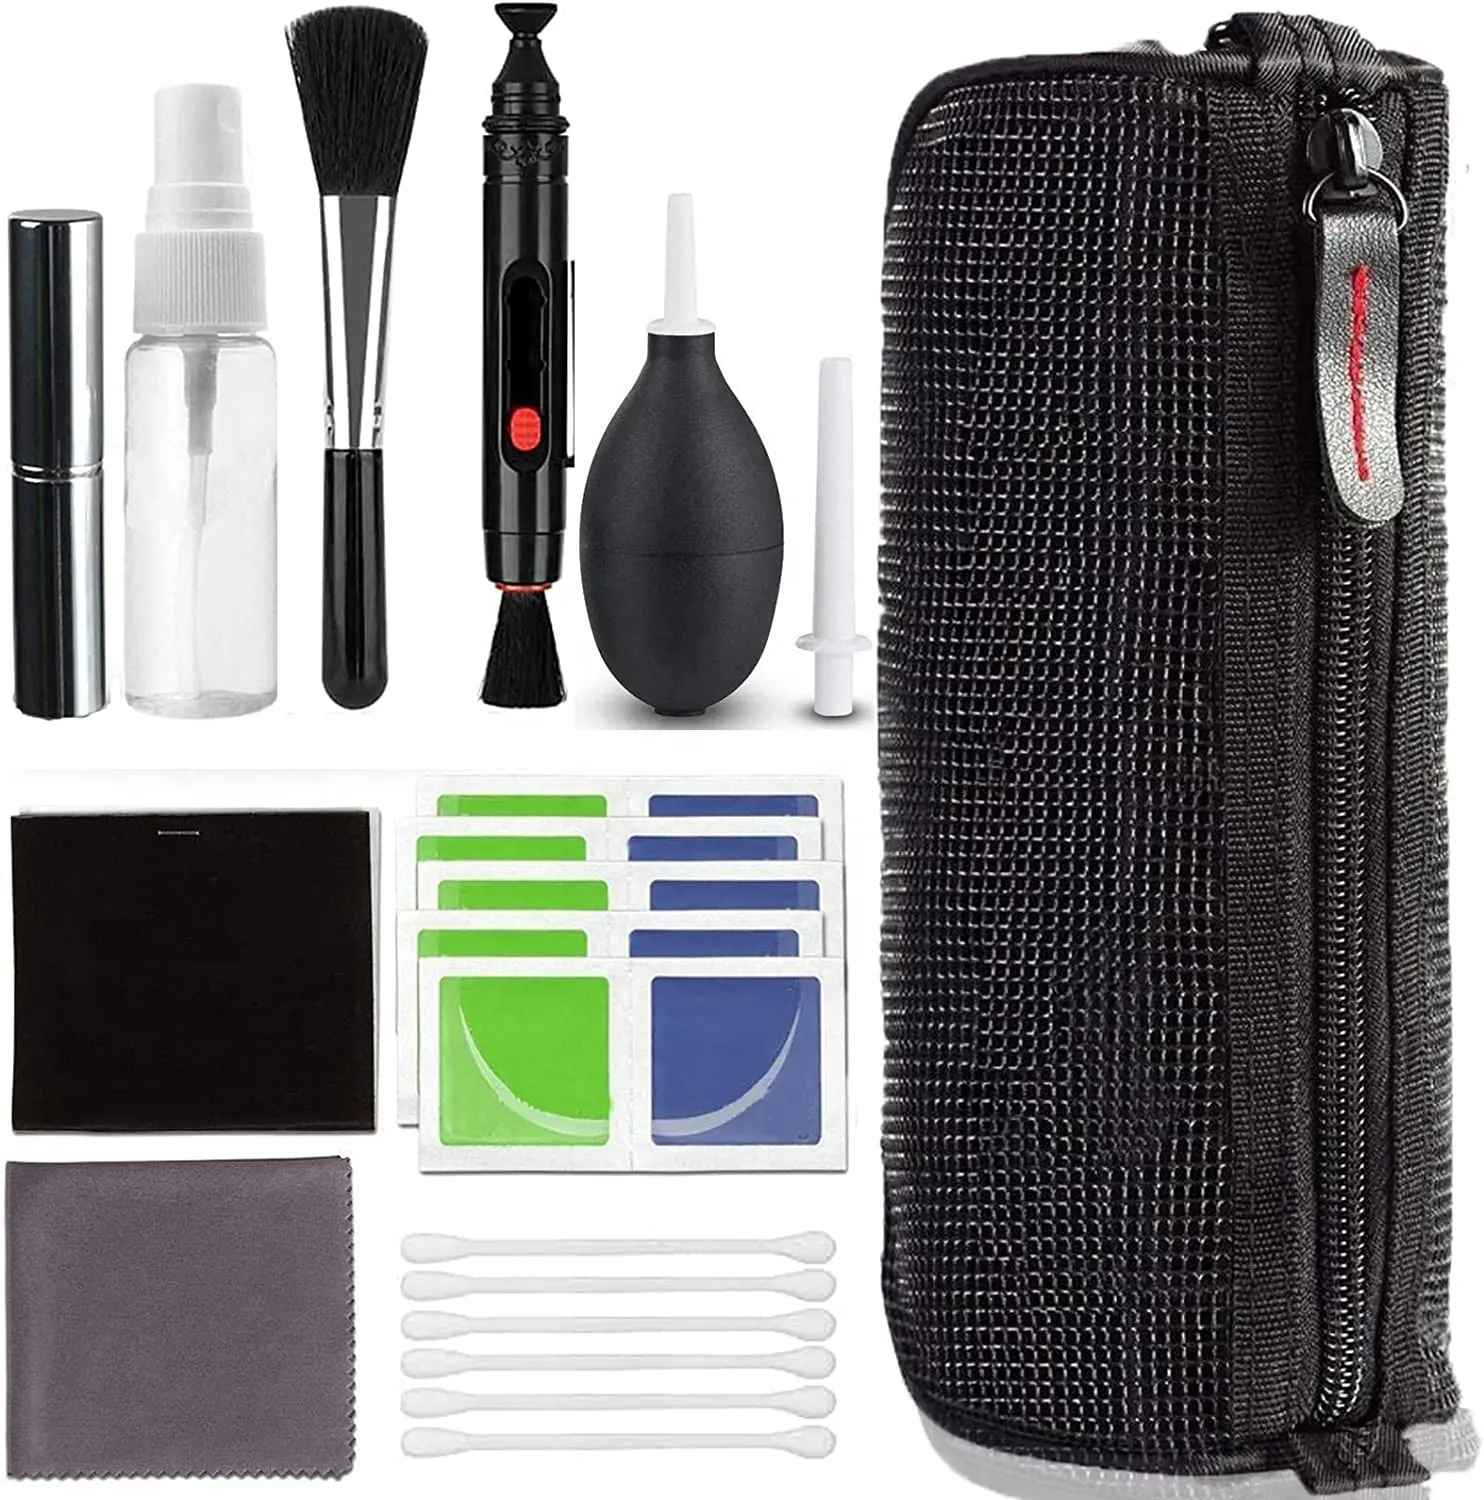 Camera Photo Accessories Professional Keyboard DSLR Lens Cleaning Tools Set Kit With Air Blower Swabs Pen Clean Cloth Brush